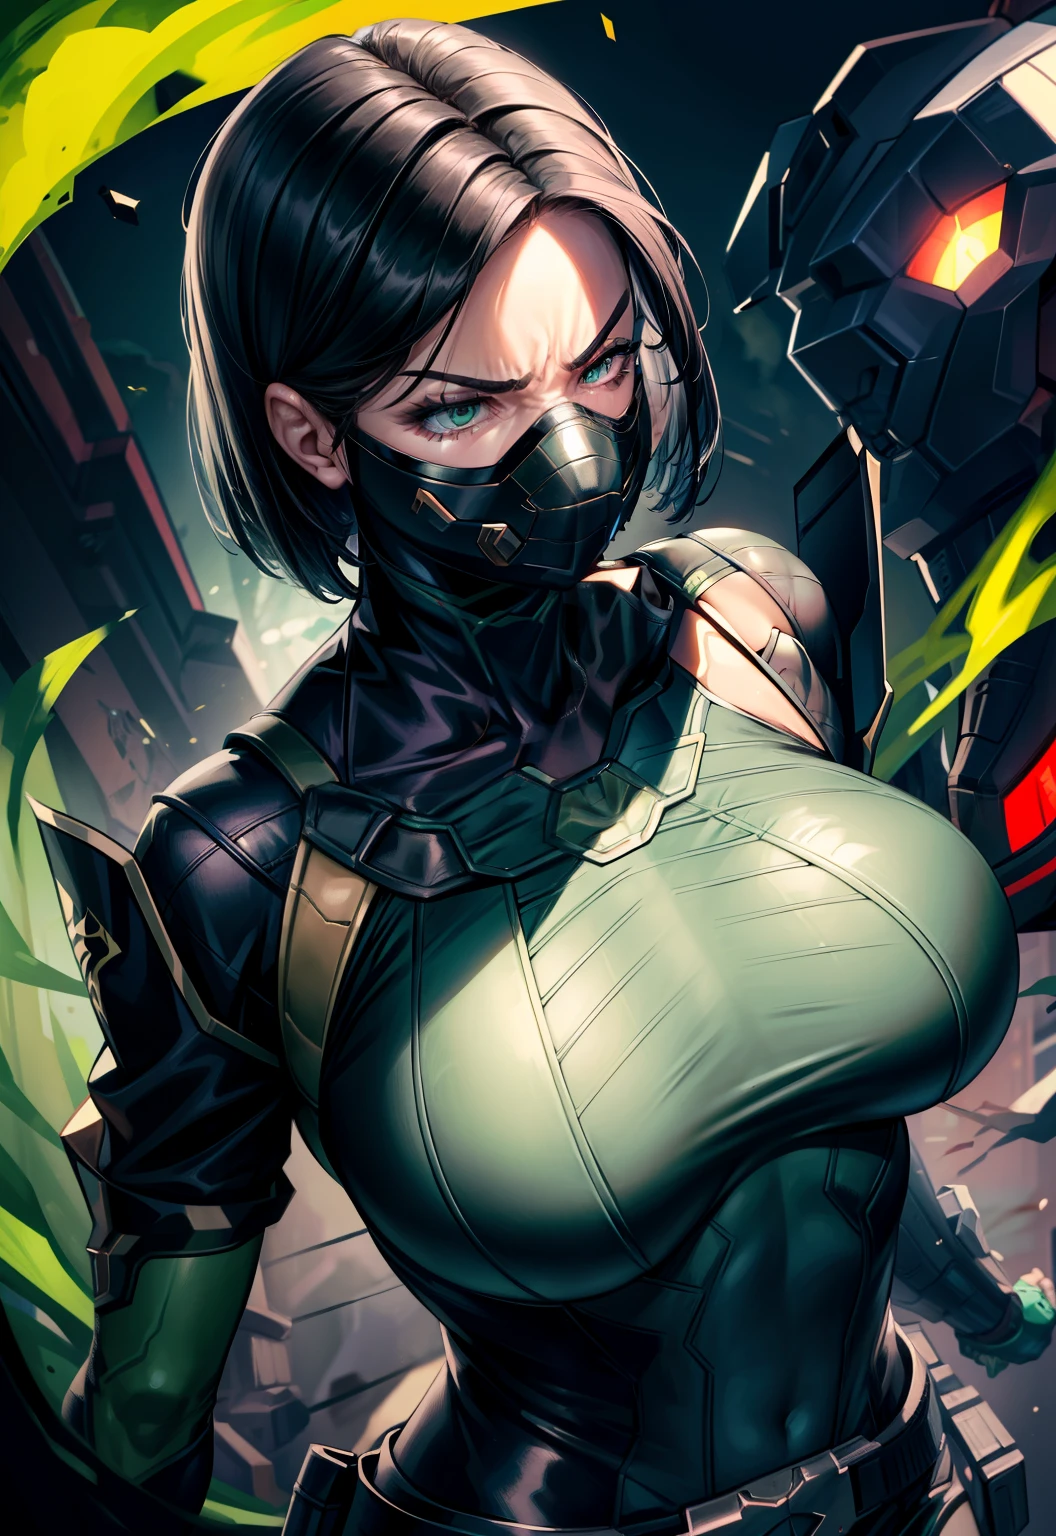 Masterpiece, Best quality,Look at the woman from below ，《Fearless viper》, tightsuit, mitts, belt, thigh boots, respirator, view the viewer, face, Portrait, Close-up, Red-faced，Glowing eyes, green smoke, Black background,huge tit，Raised chest，Close-up of chest，oversized ，chest focus，Woman in a swimsuit，angry look，Extremely erotic figure，Staring angrily at the screen，Facing the screen，High-gloss dark style